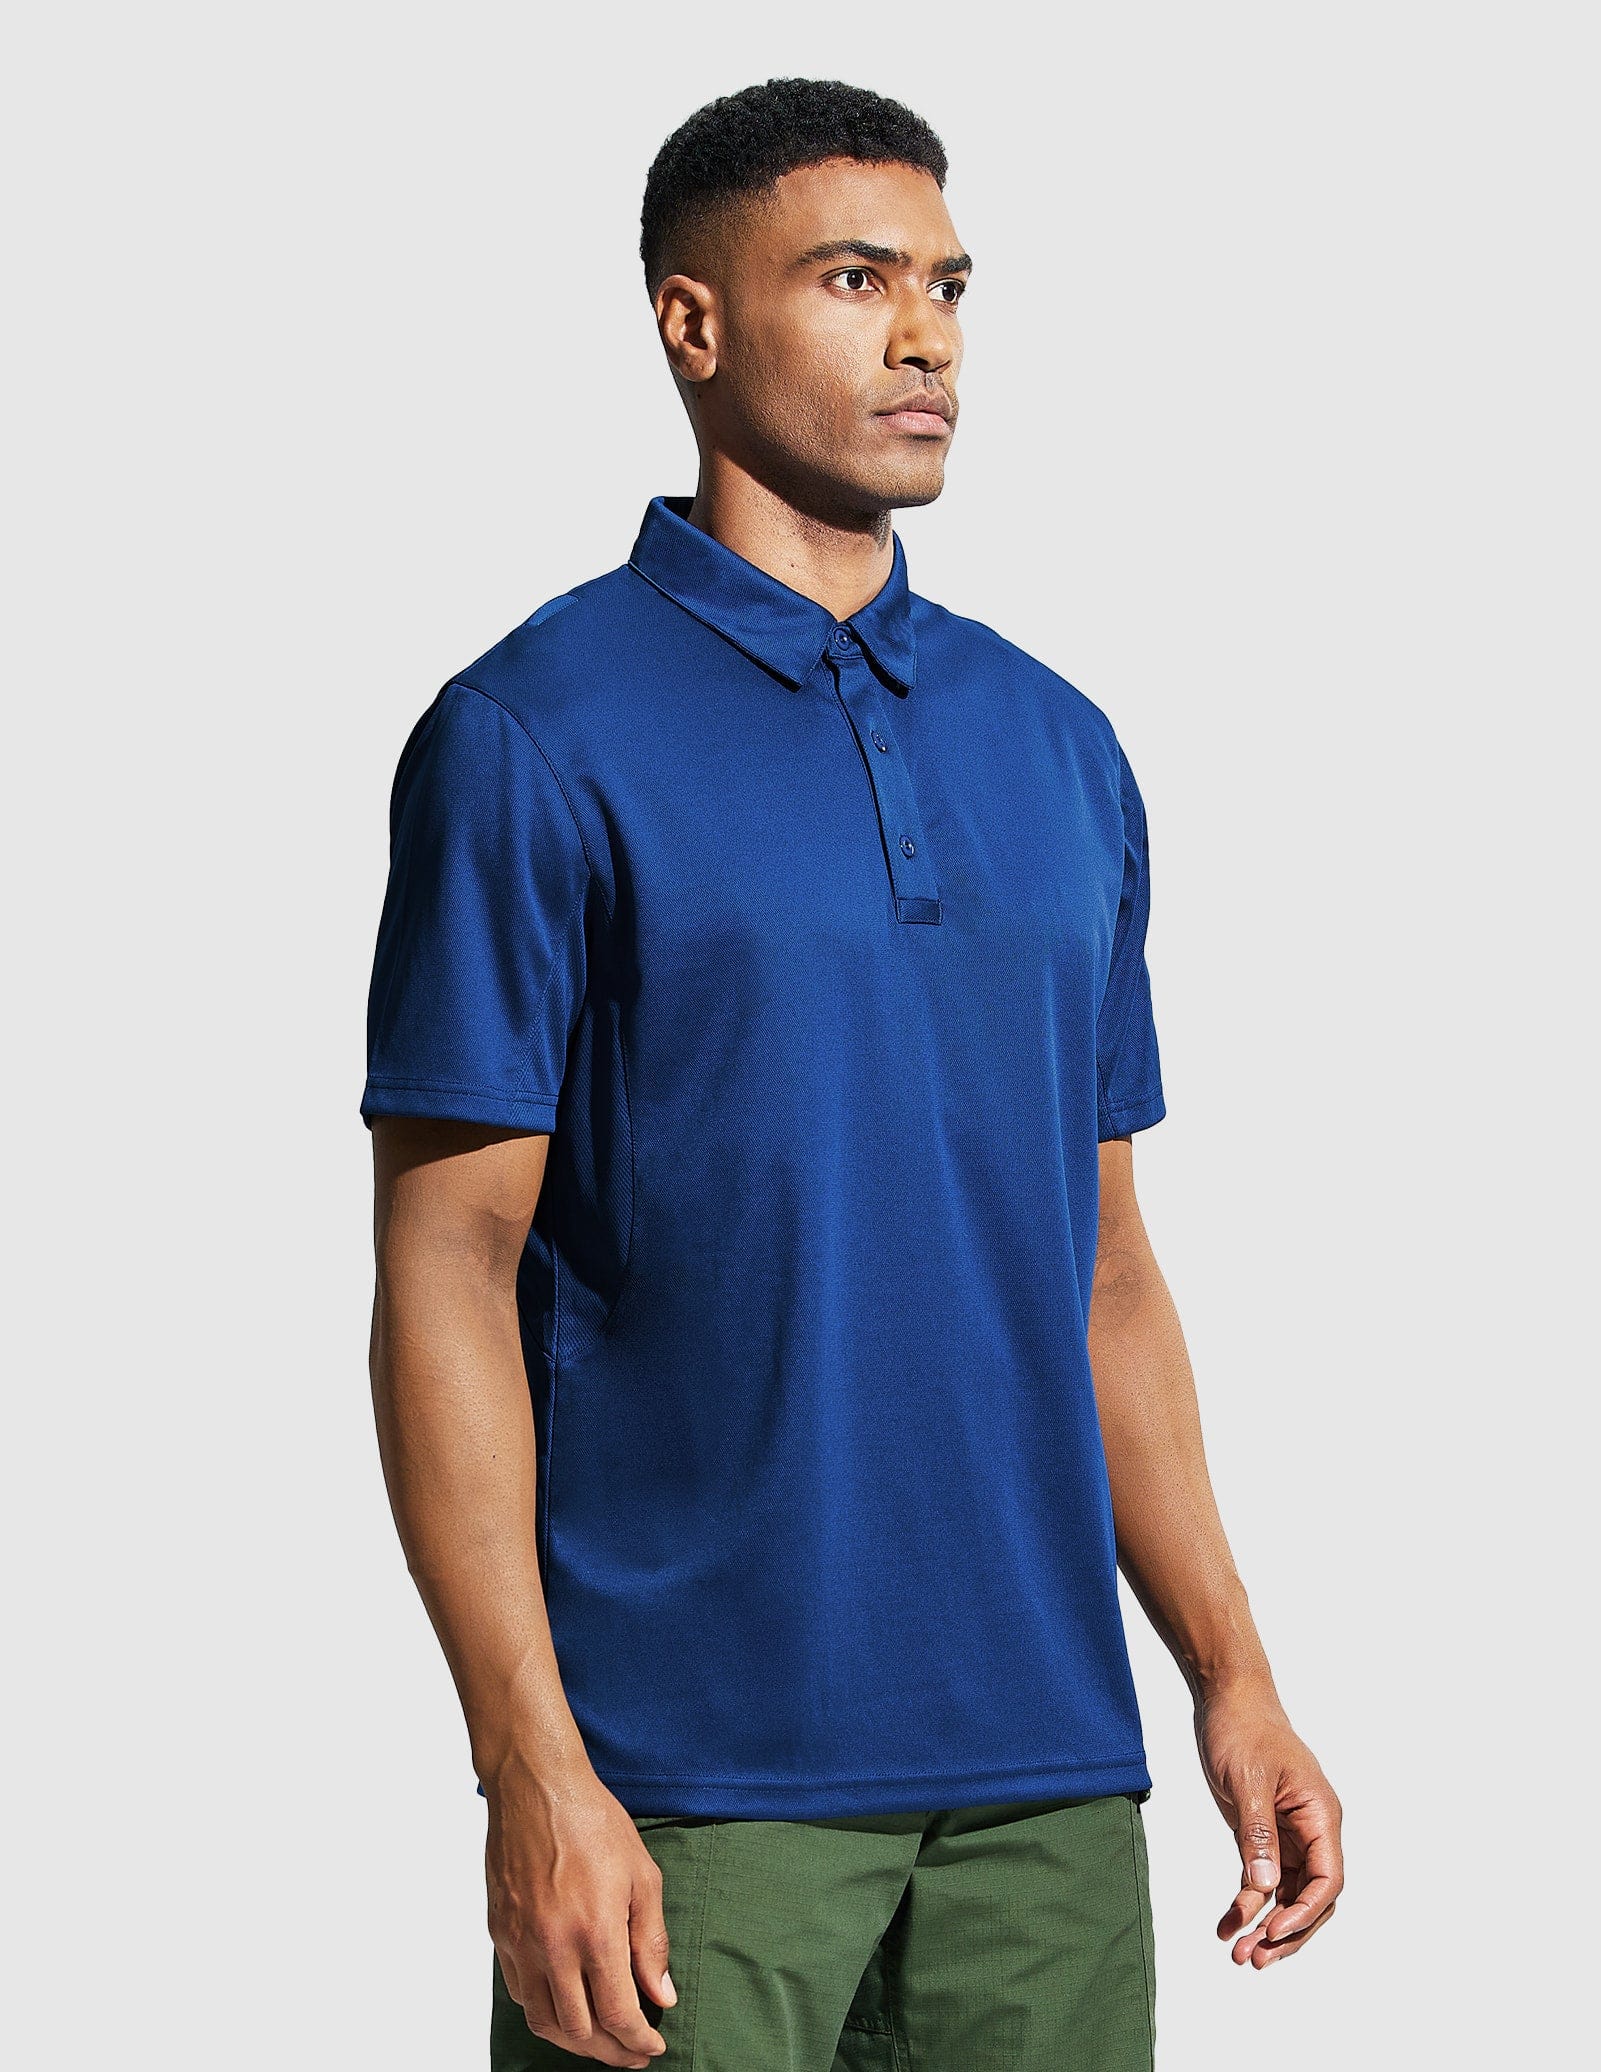 Men's Tactical Polo Shirts Outdoor Performance Collared Shirt Men Polo Classic Blue / S MIER